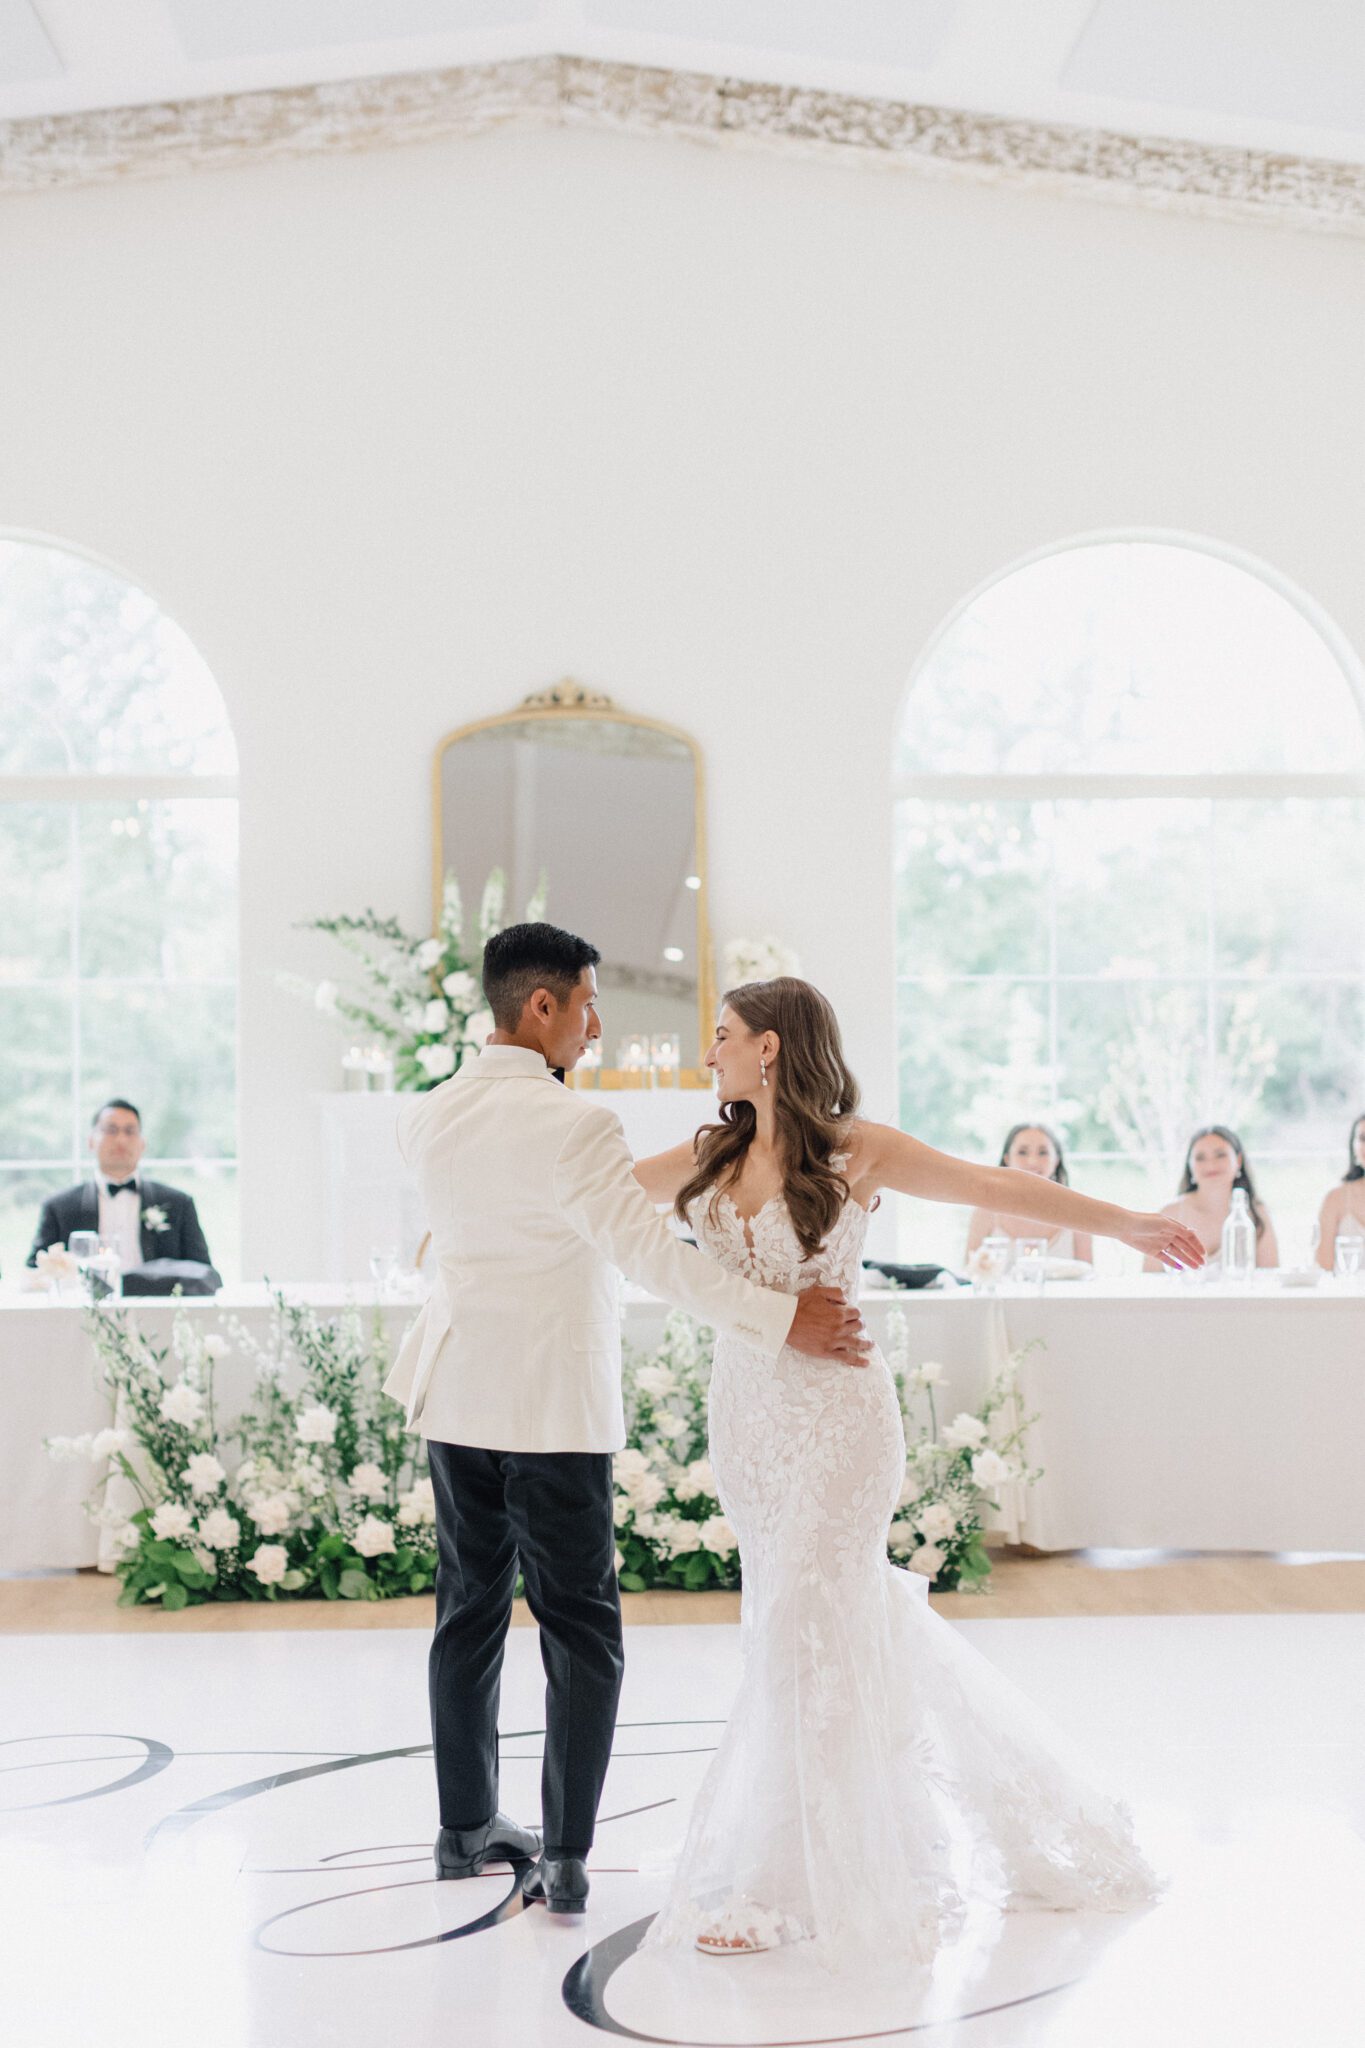 Bride and groom's first dance at wedding reception at Sparrow Lane Events in Alberta. Summer wedding features white roses, greenery blush decor accents and warm wood tones.